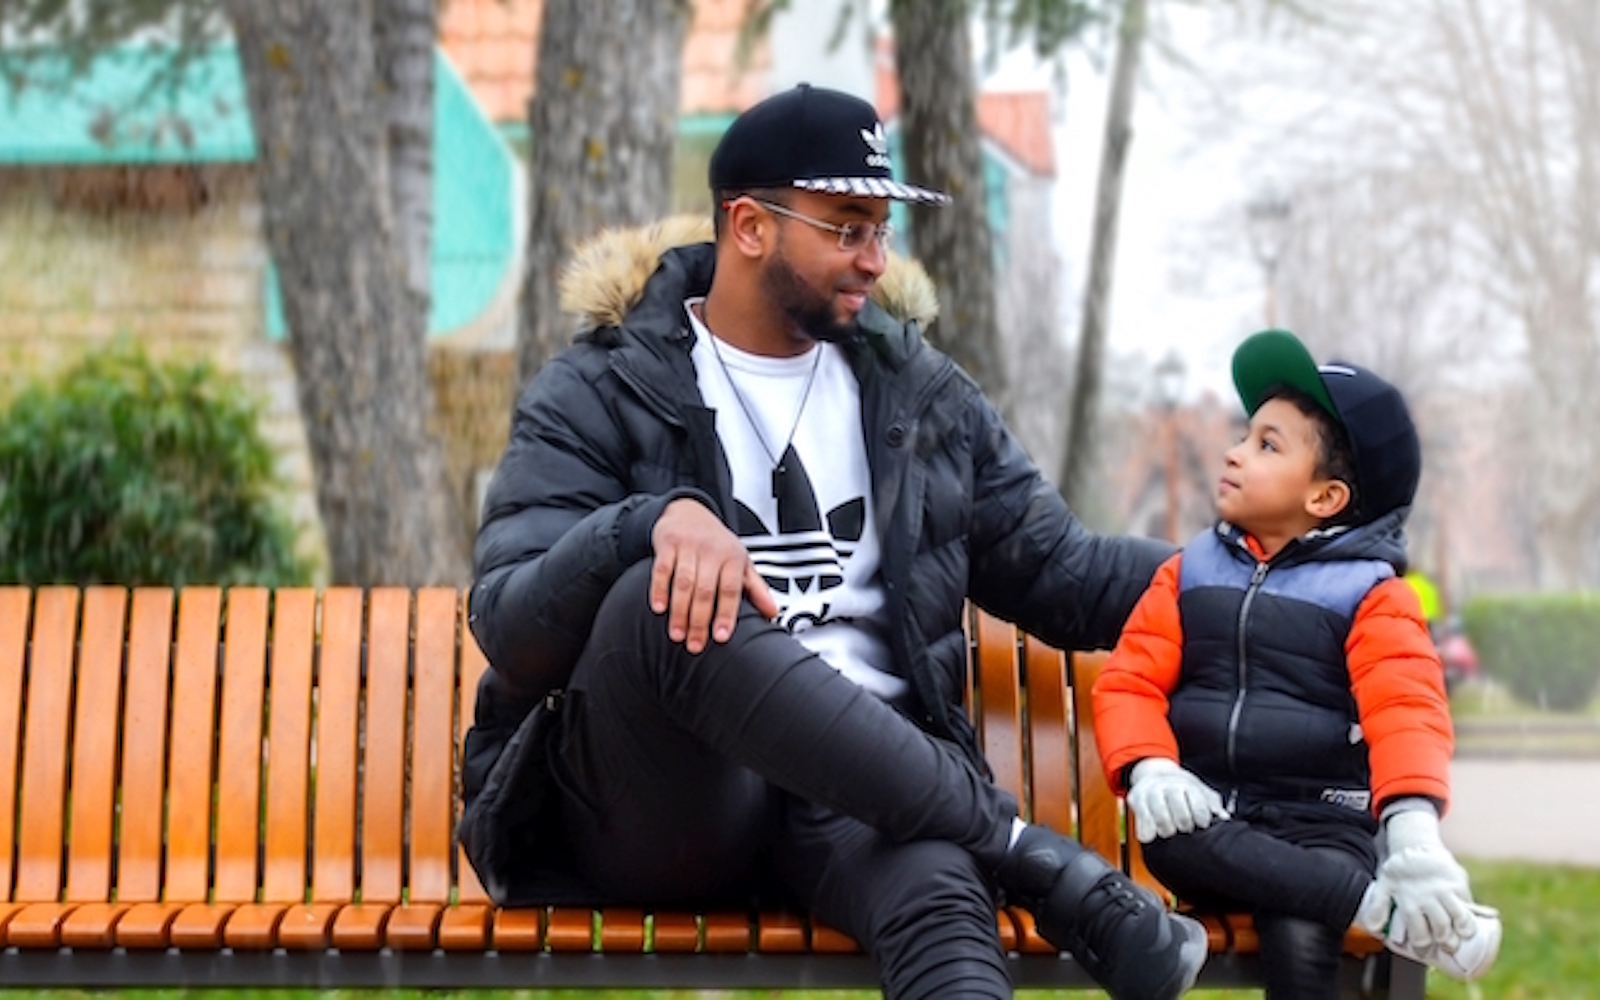 Black Boys Don’t Need More Discipline, They Need Mentors | Education Post